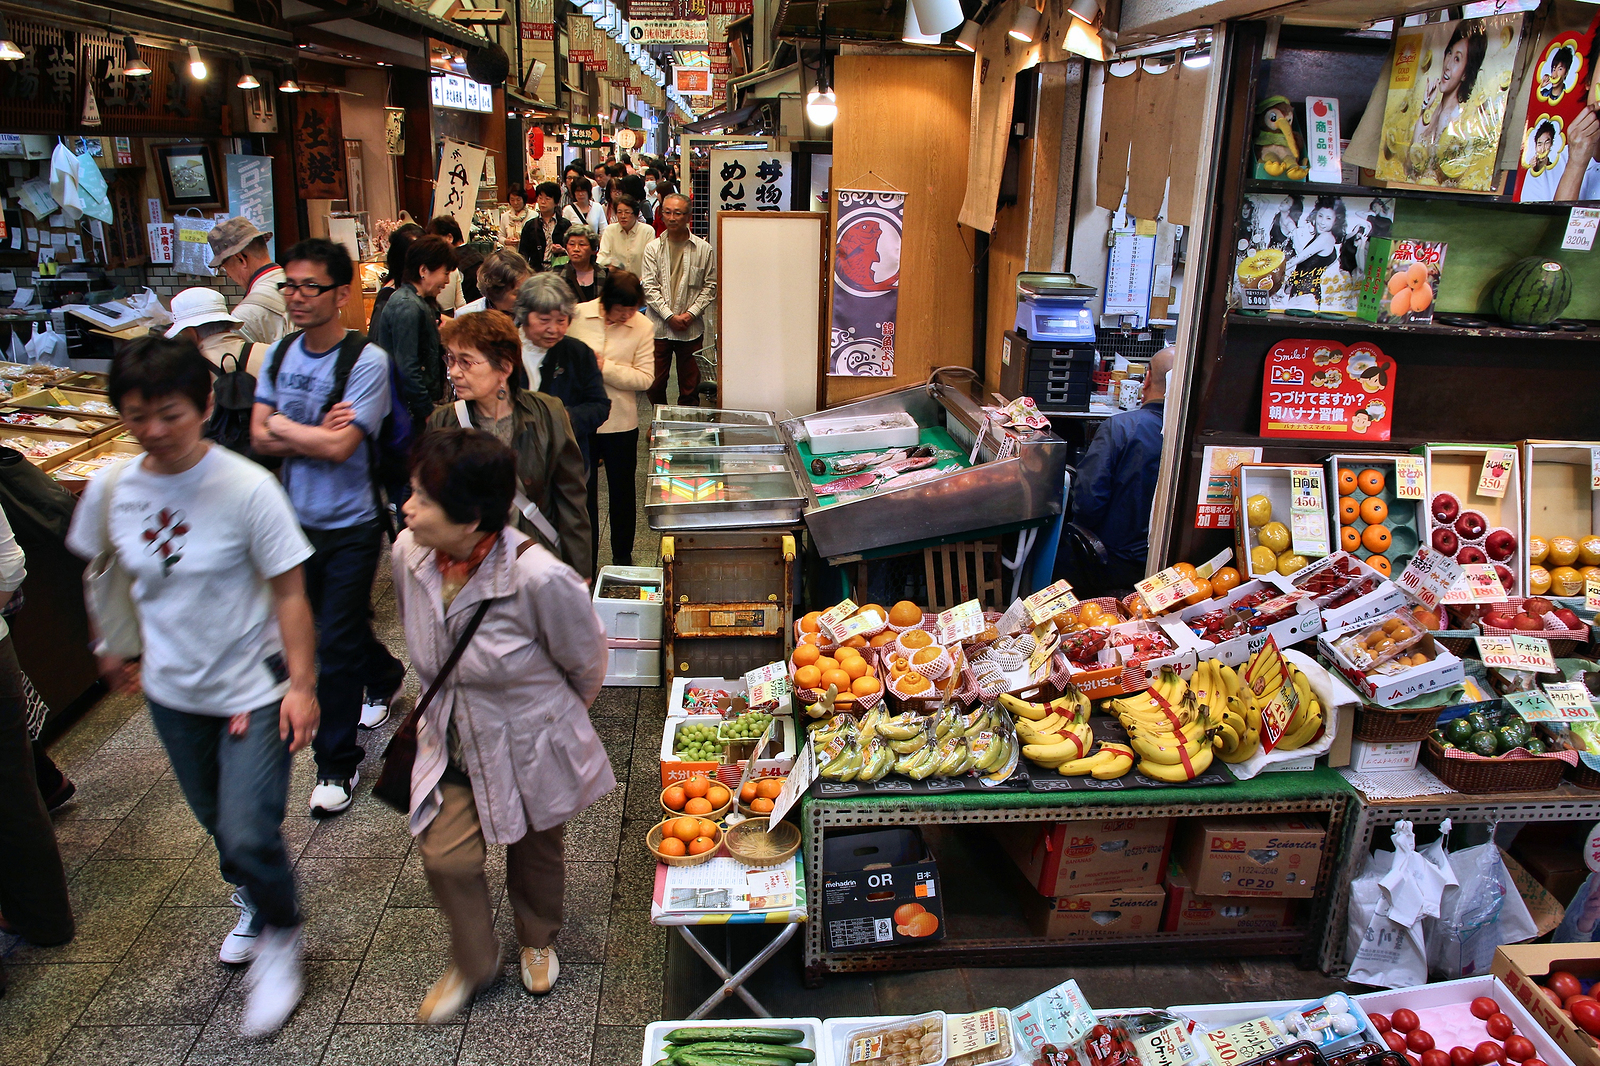 Japanese continue to struggle to make ends meet as its recession deepens